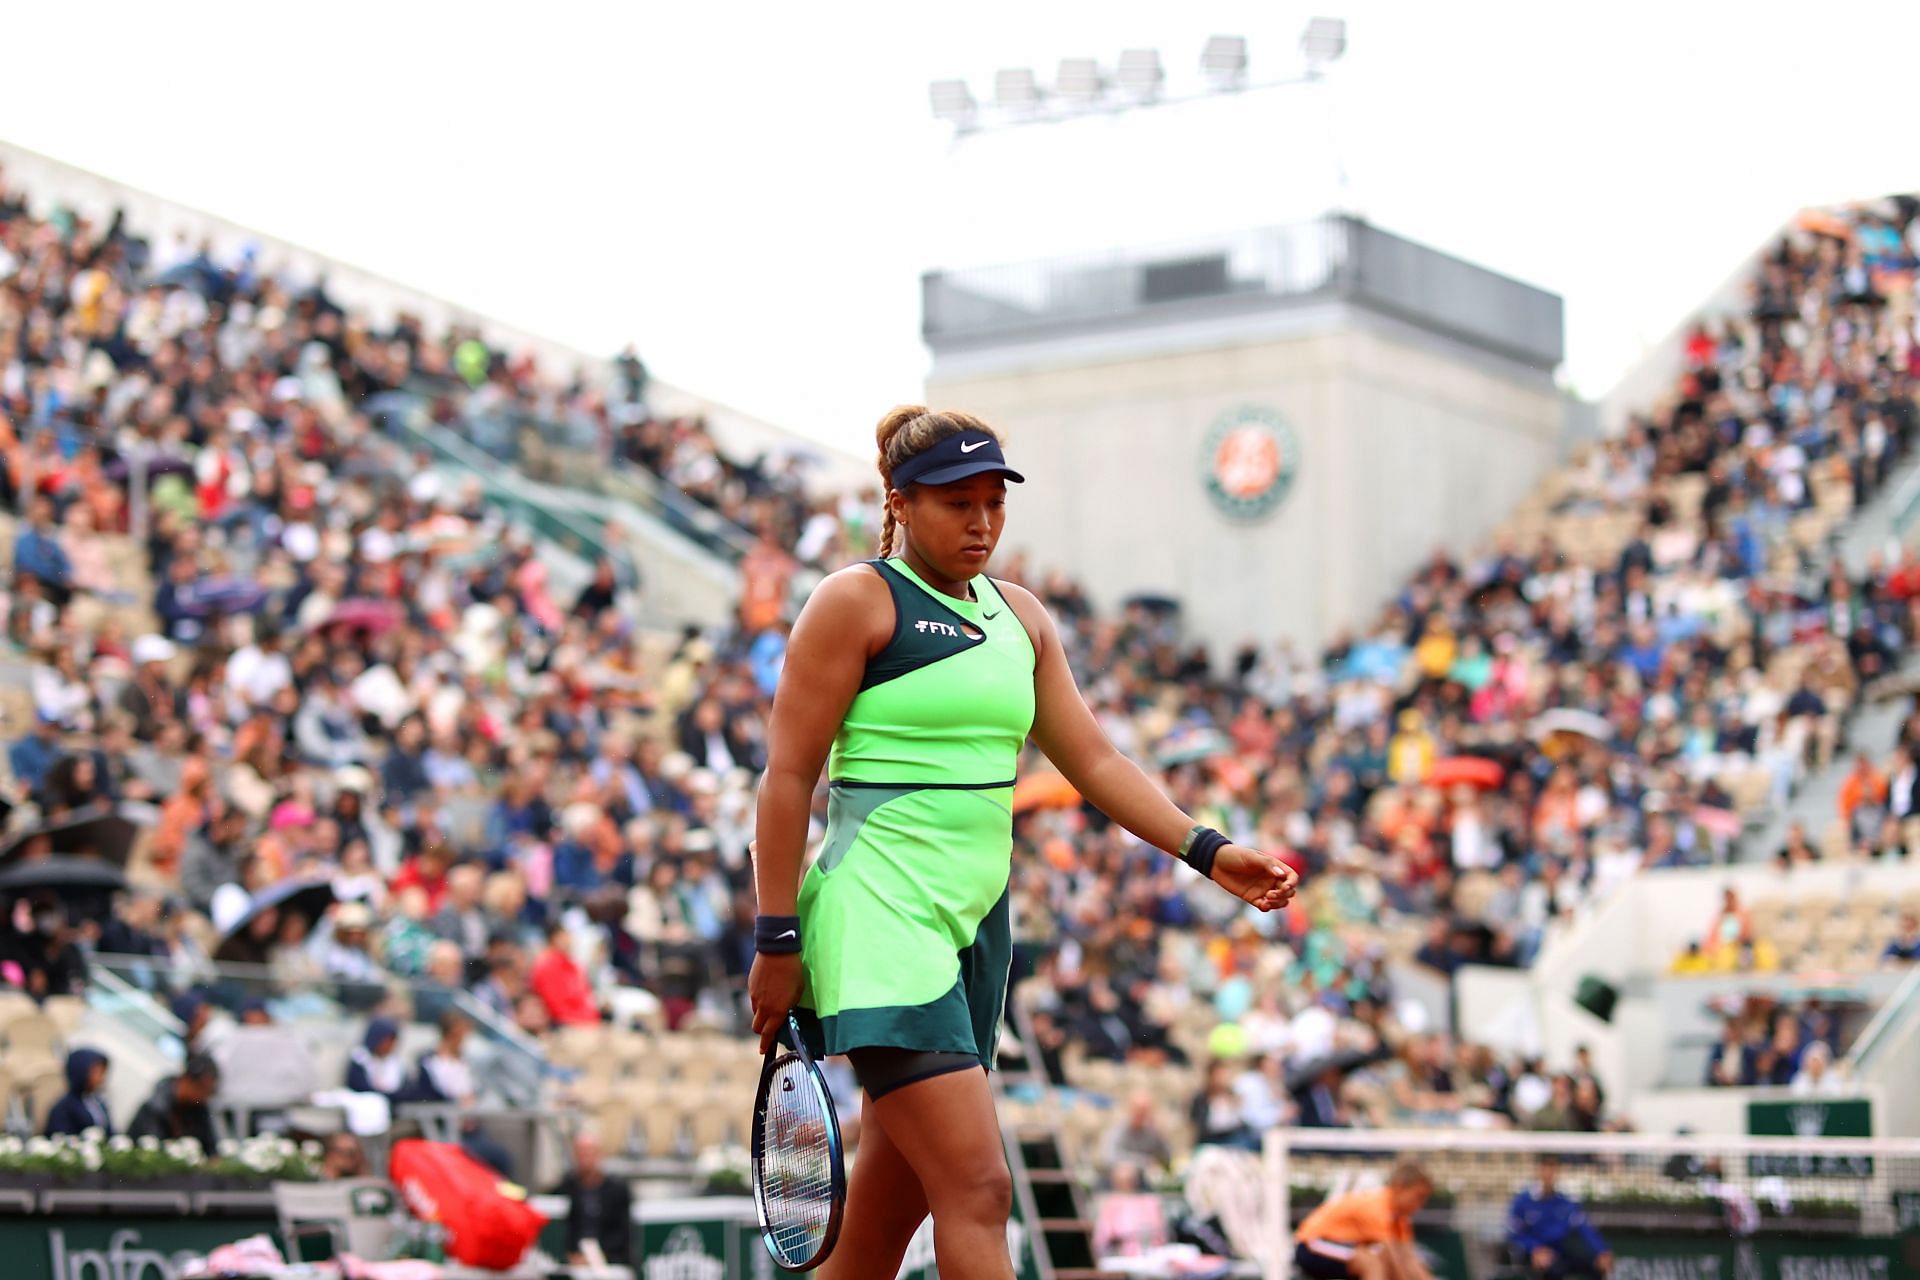 Naomi Osaka in her green outfit at the 2022 French Open - Day Two